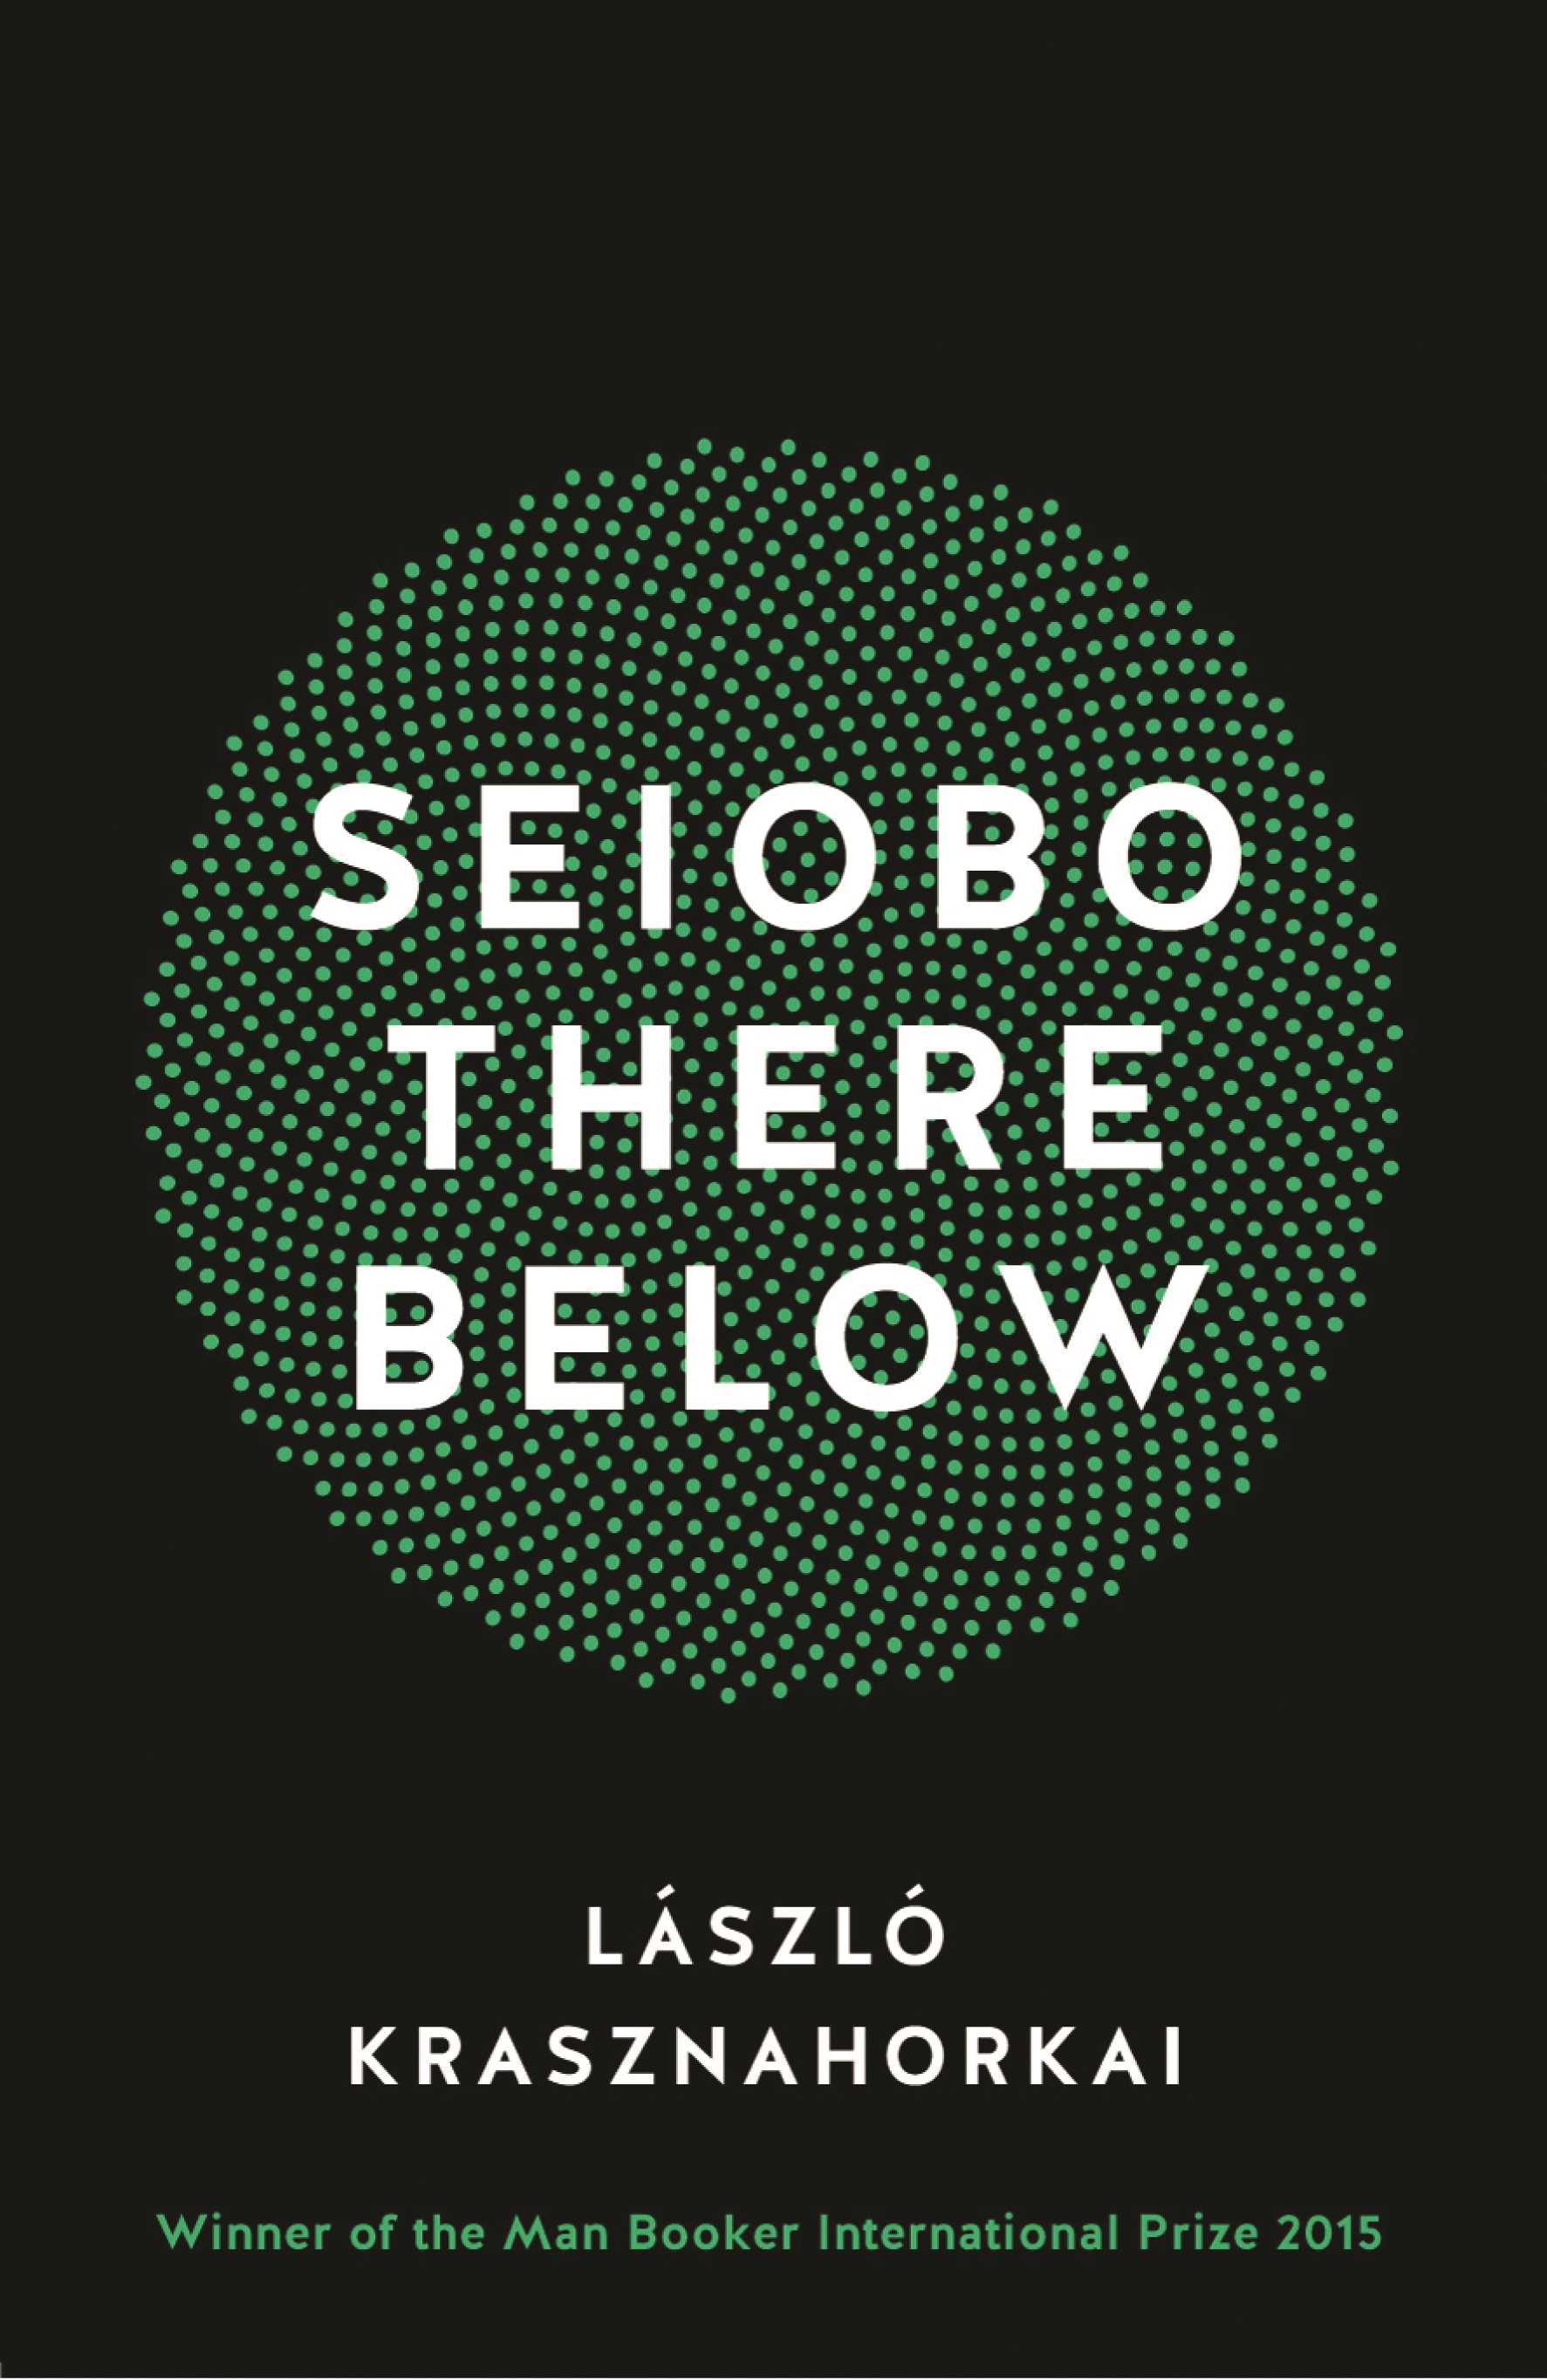 SEIOBO THERE BELOW